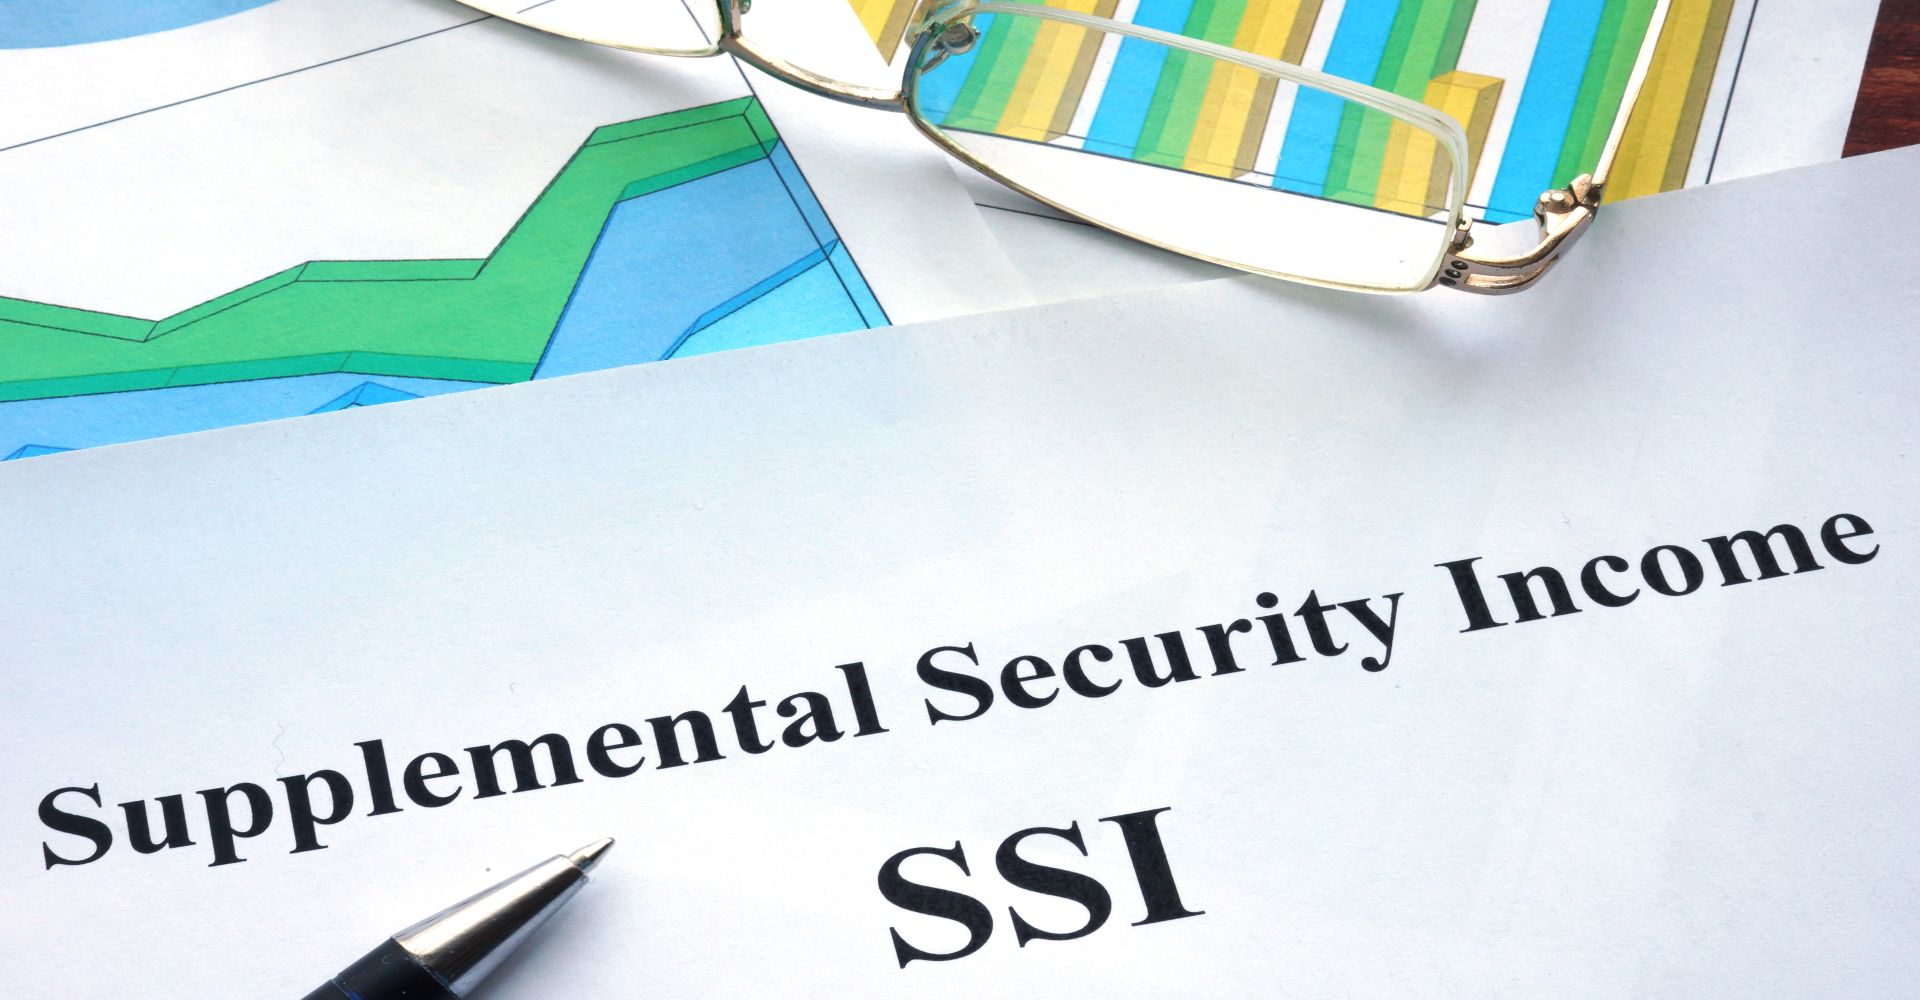 How To Apply For Supplemental Security Income?